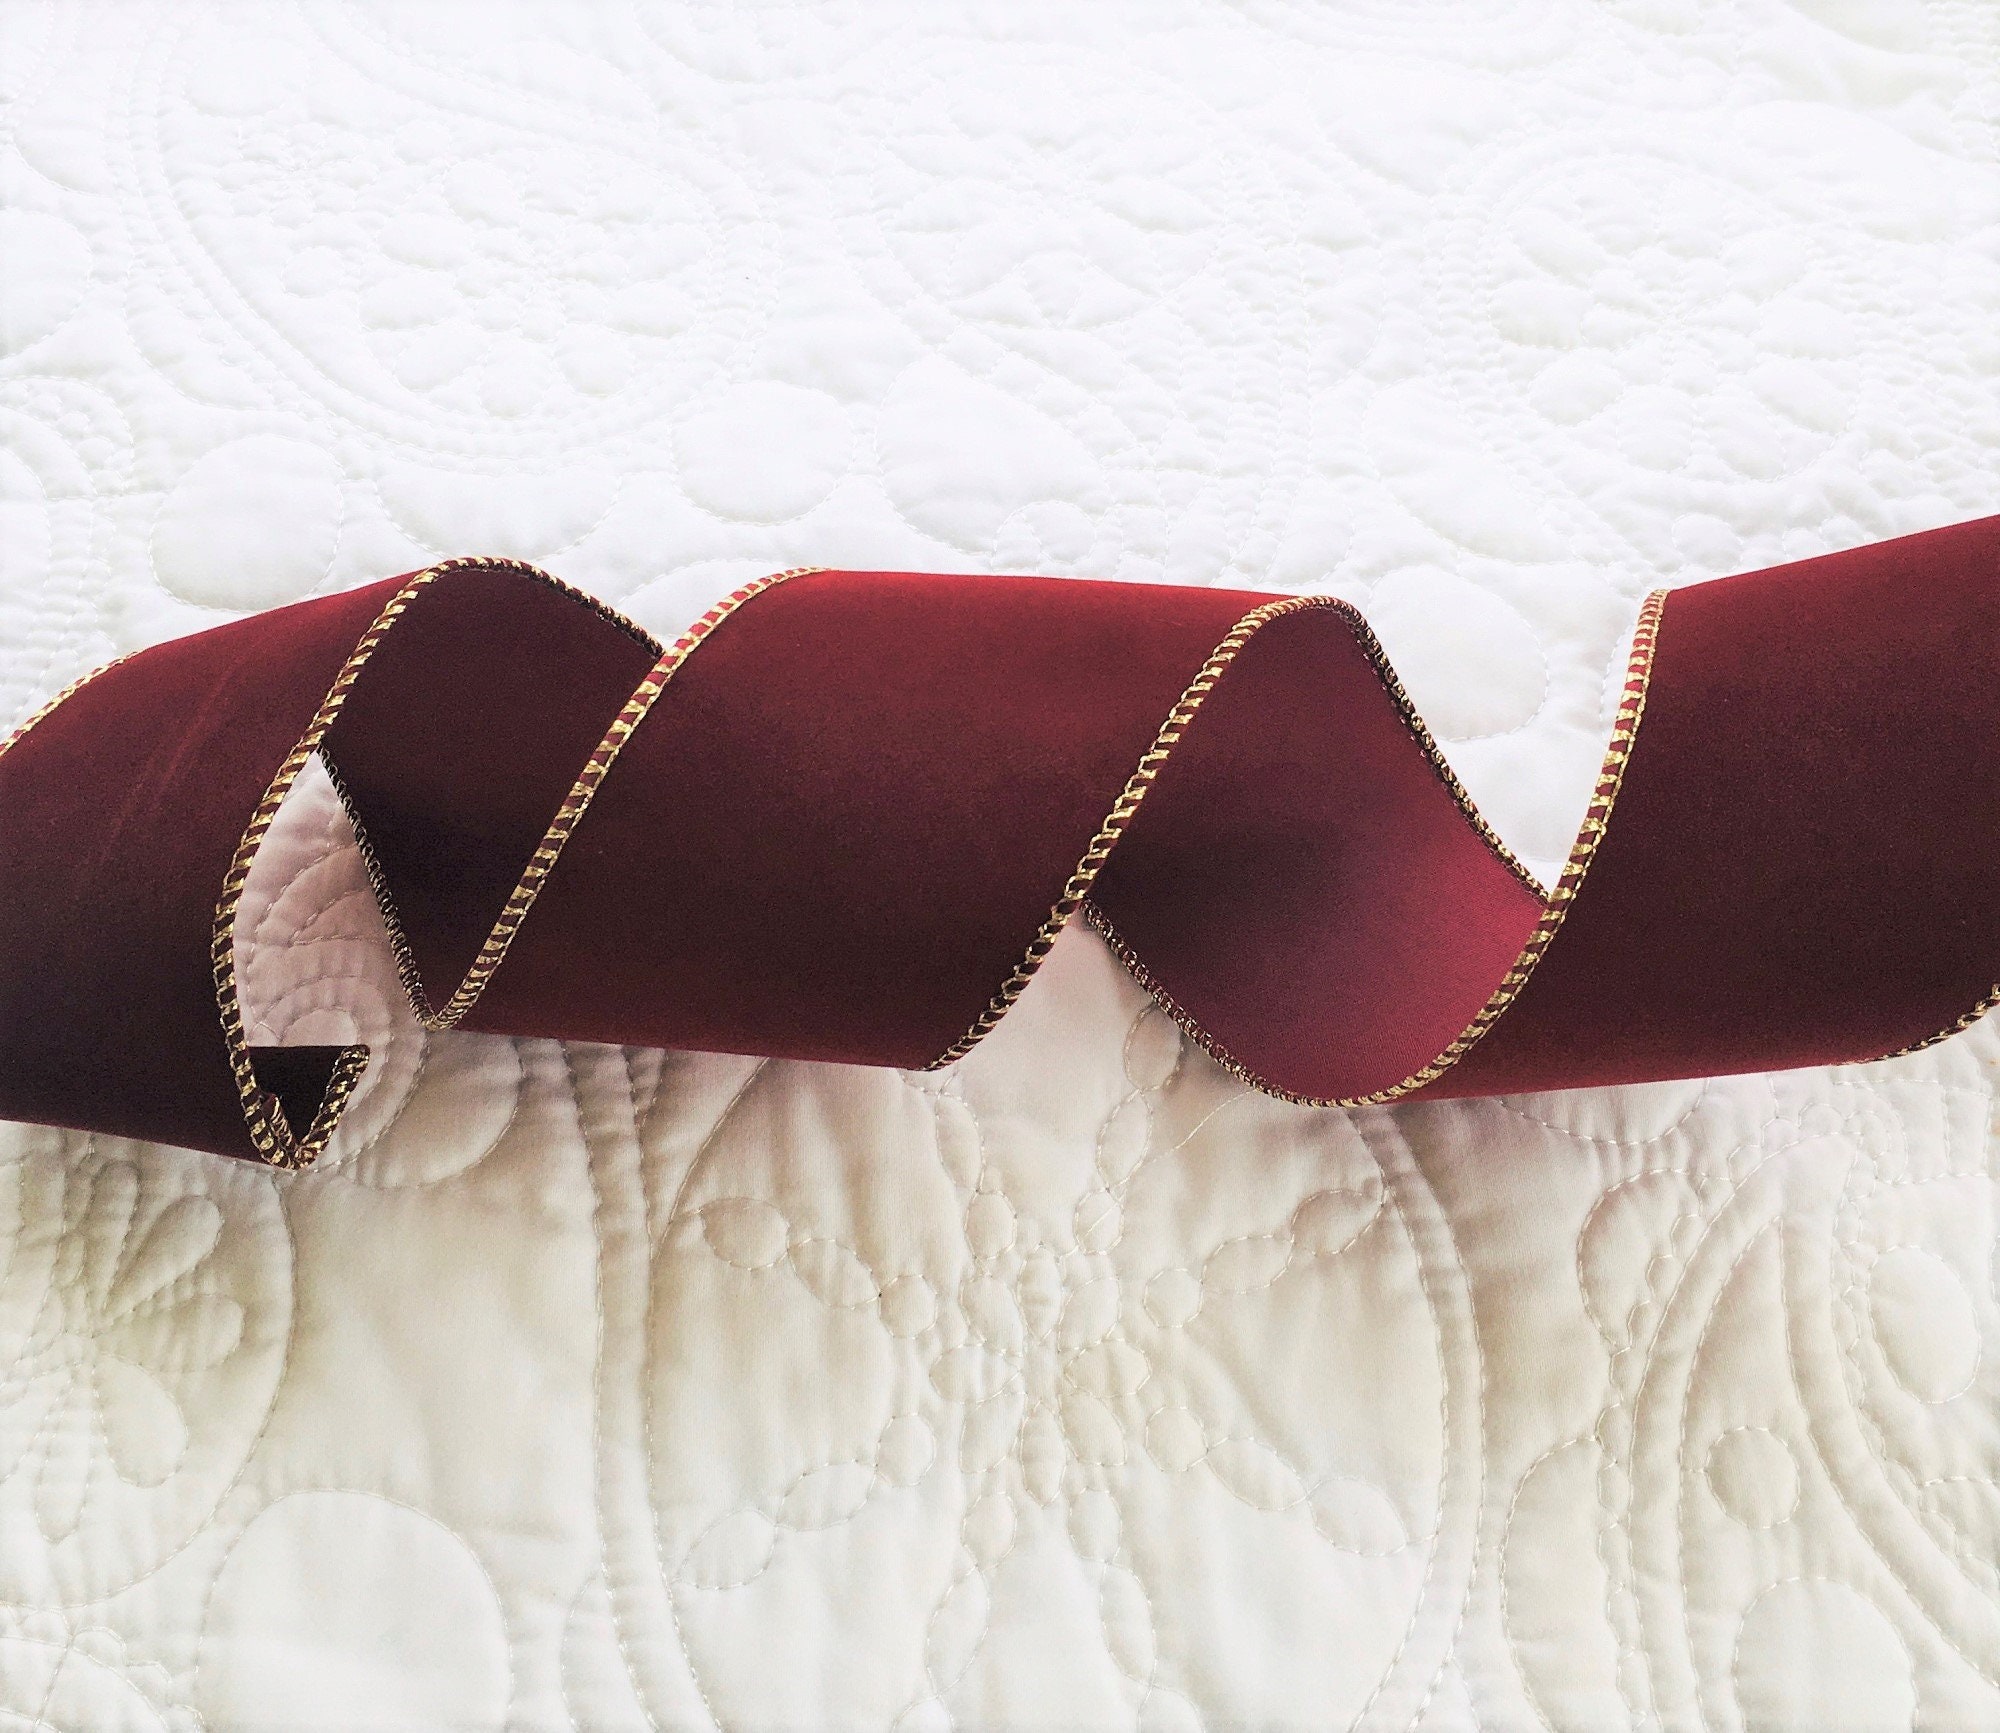 Burgundy Red Wired Taffeta Ribbon - Made in France (3 Widths to choose from)